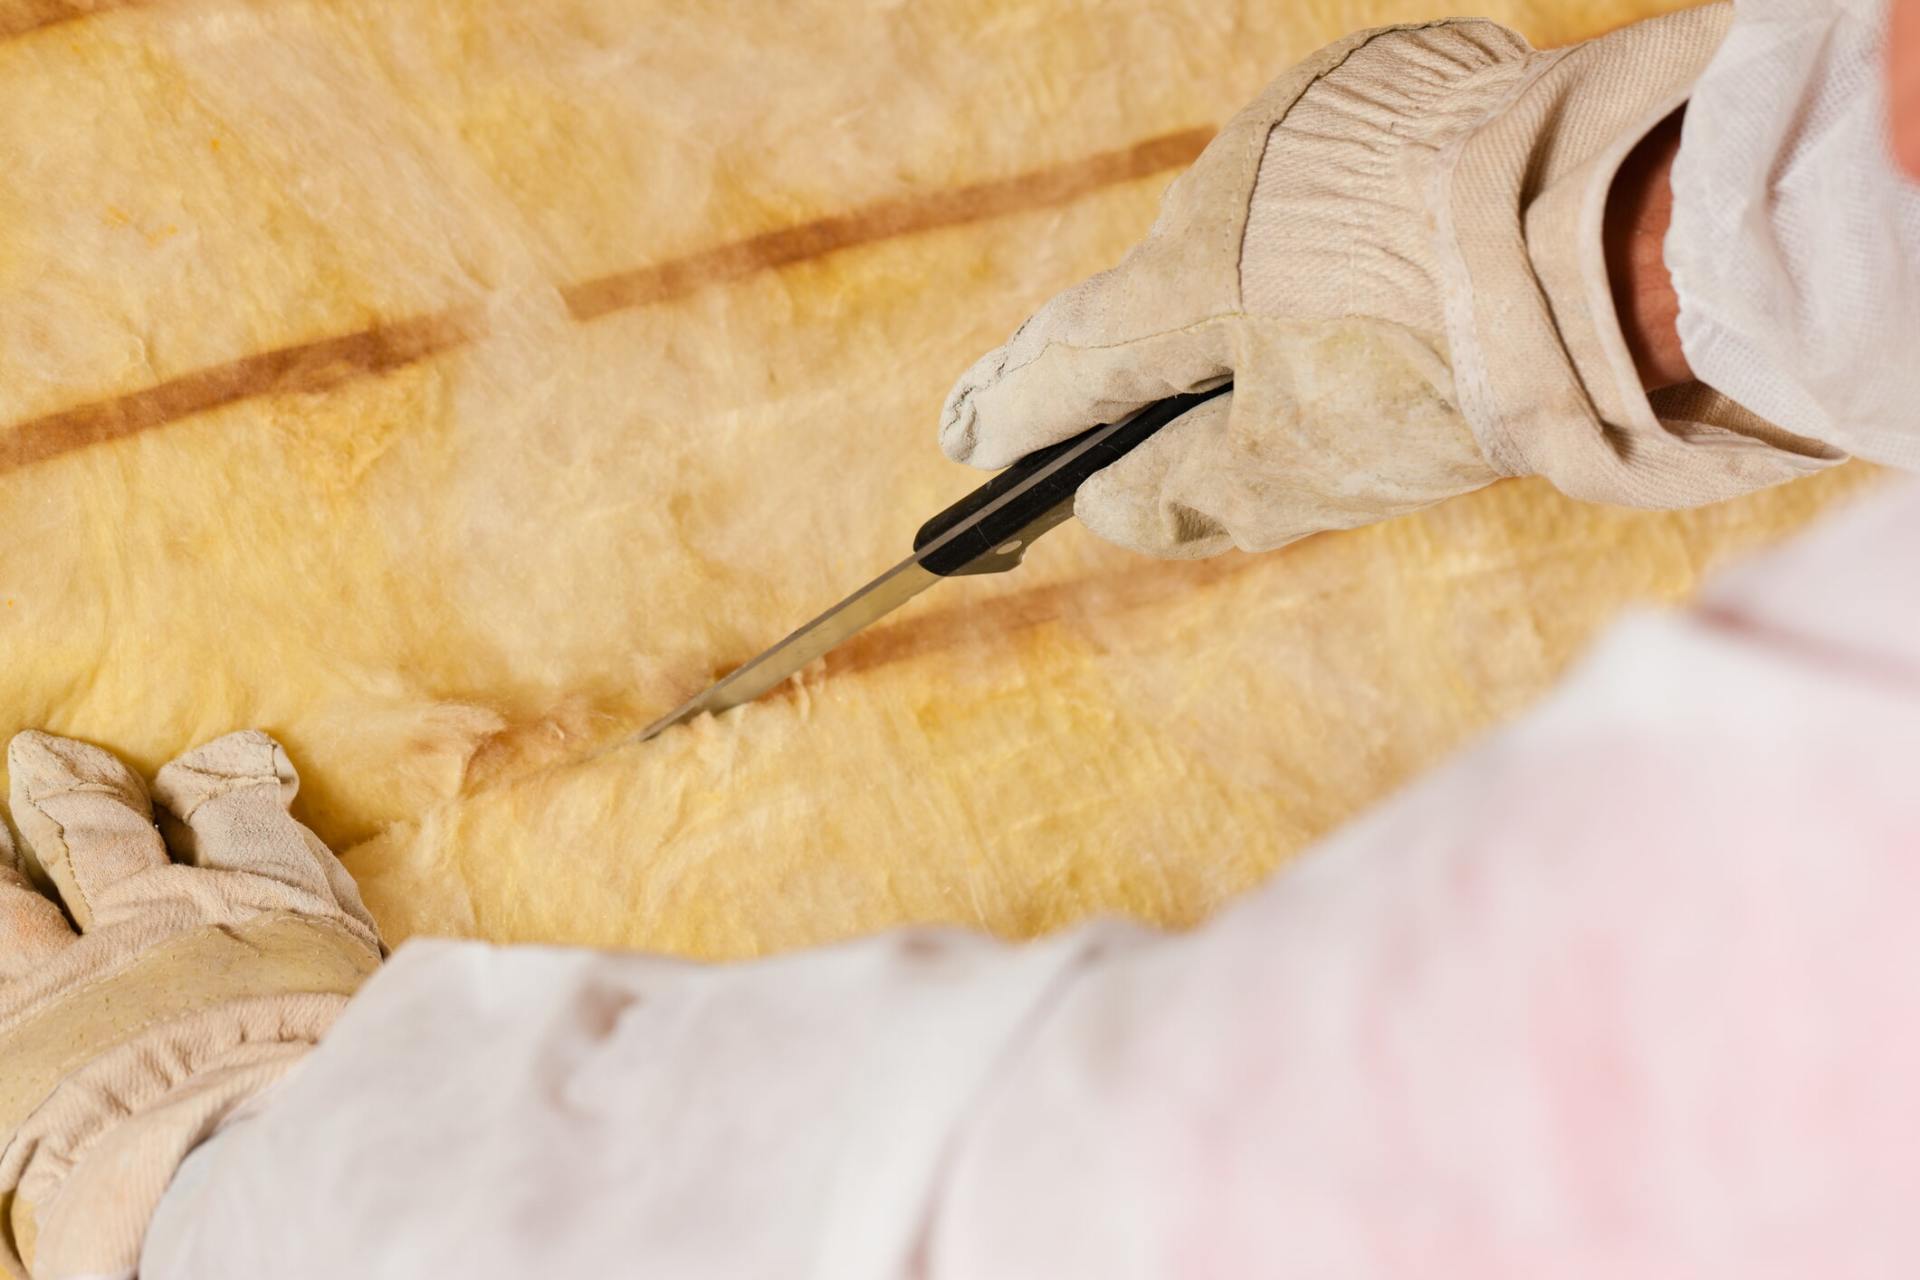 Man cutting the Material — Insulation Repair in Northbrook, IL